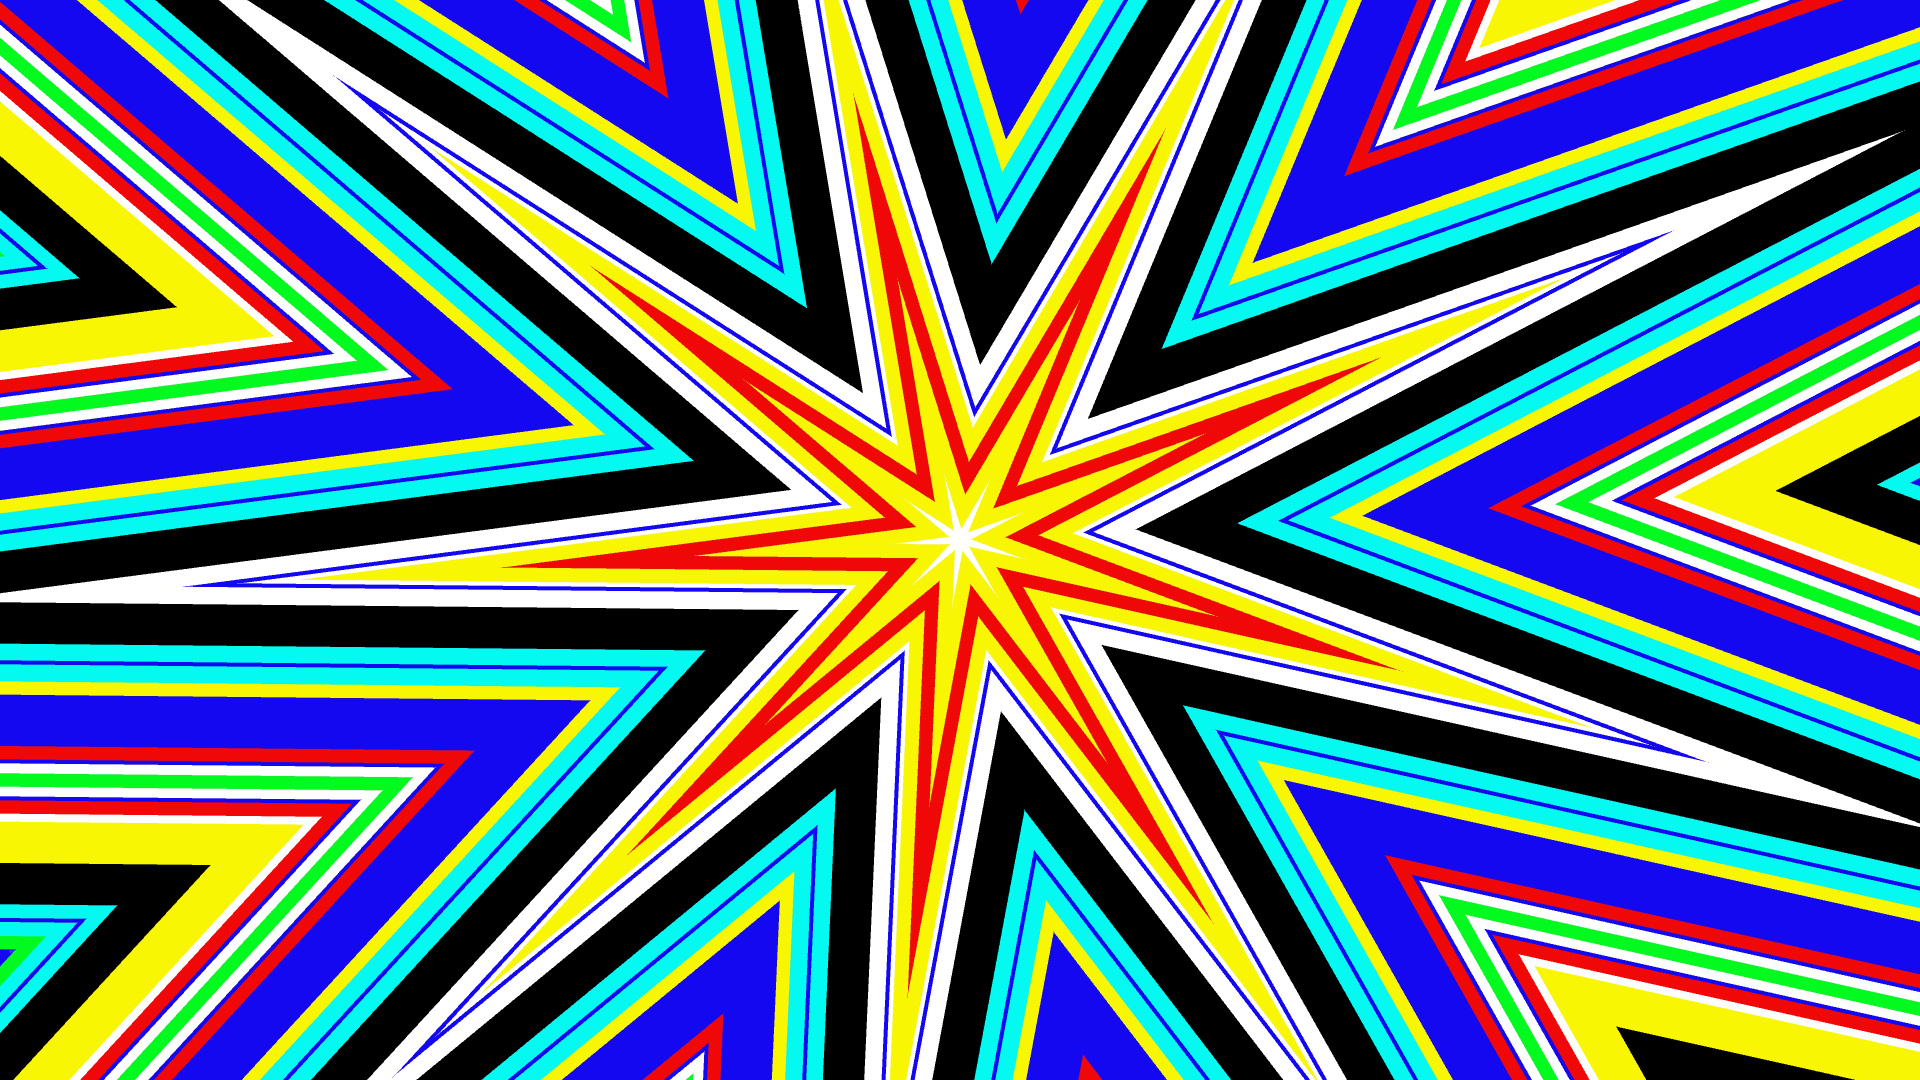 Abstract Artistic Colorful Colors Digital Art Kaleidoscope Shapes Star 1920x1080